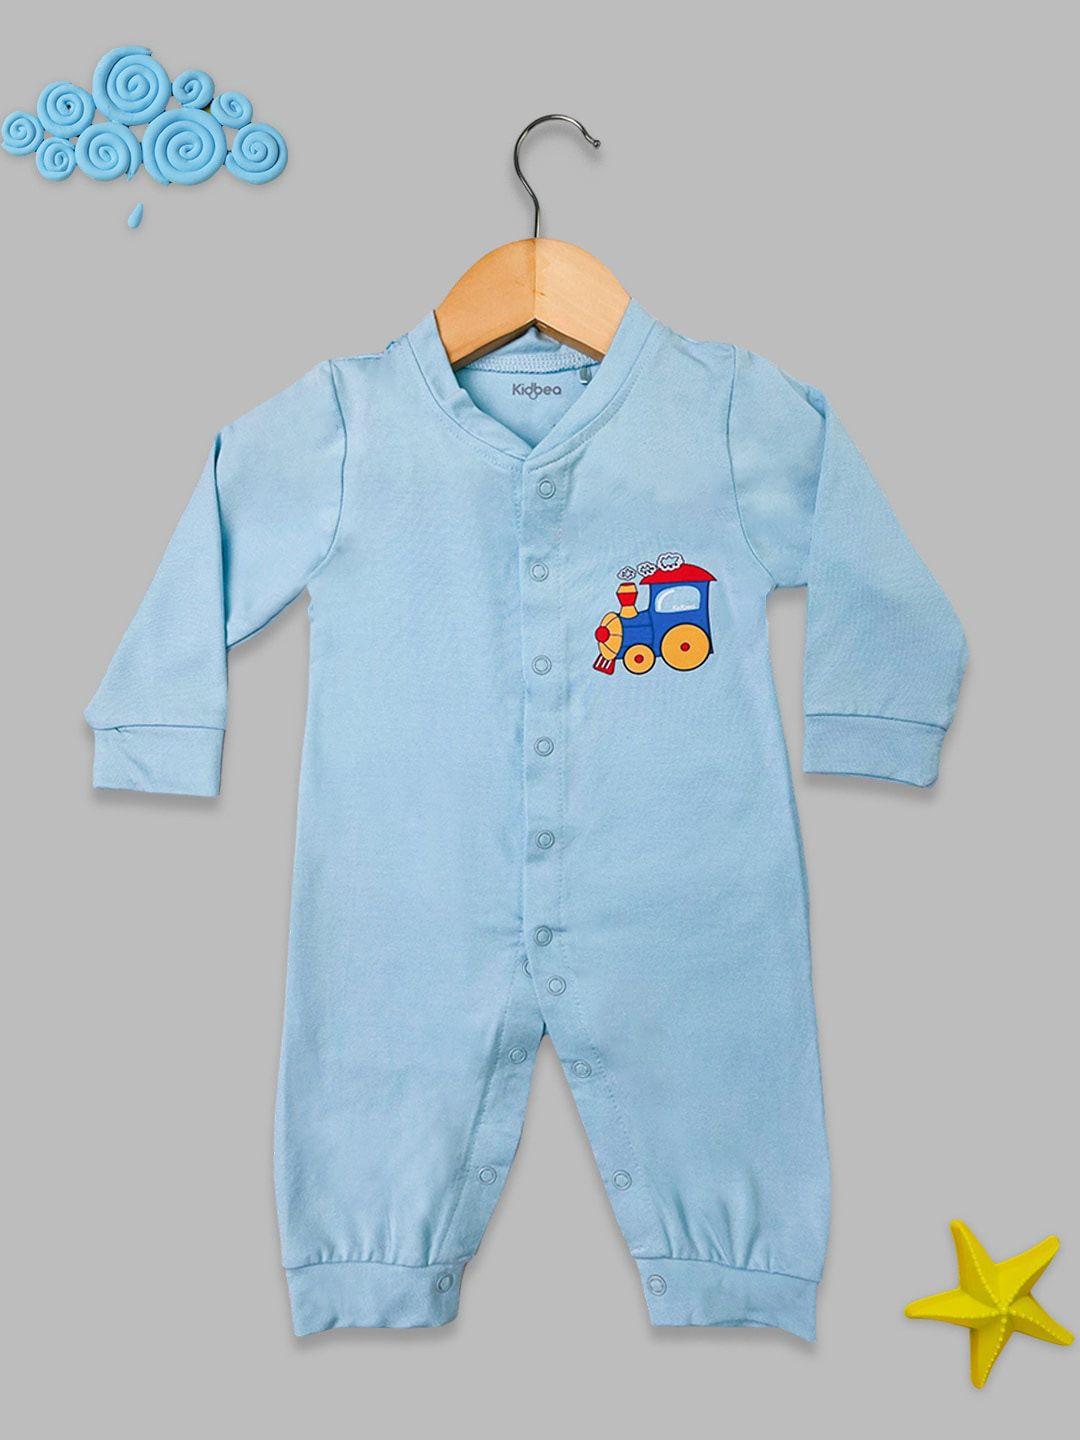 kidbea-infant-boys-bamboo-cotton-rompers